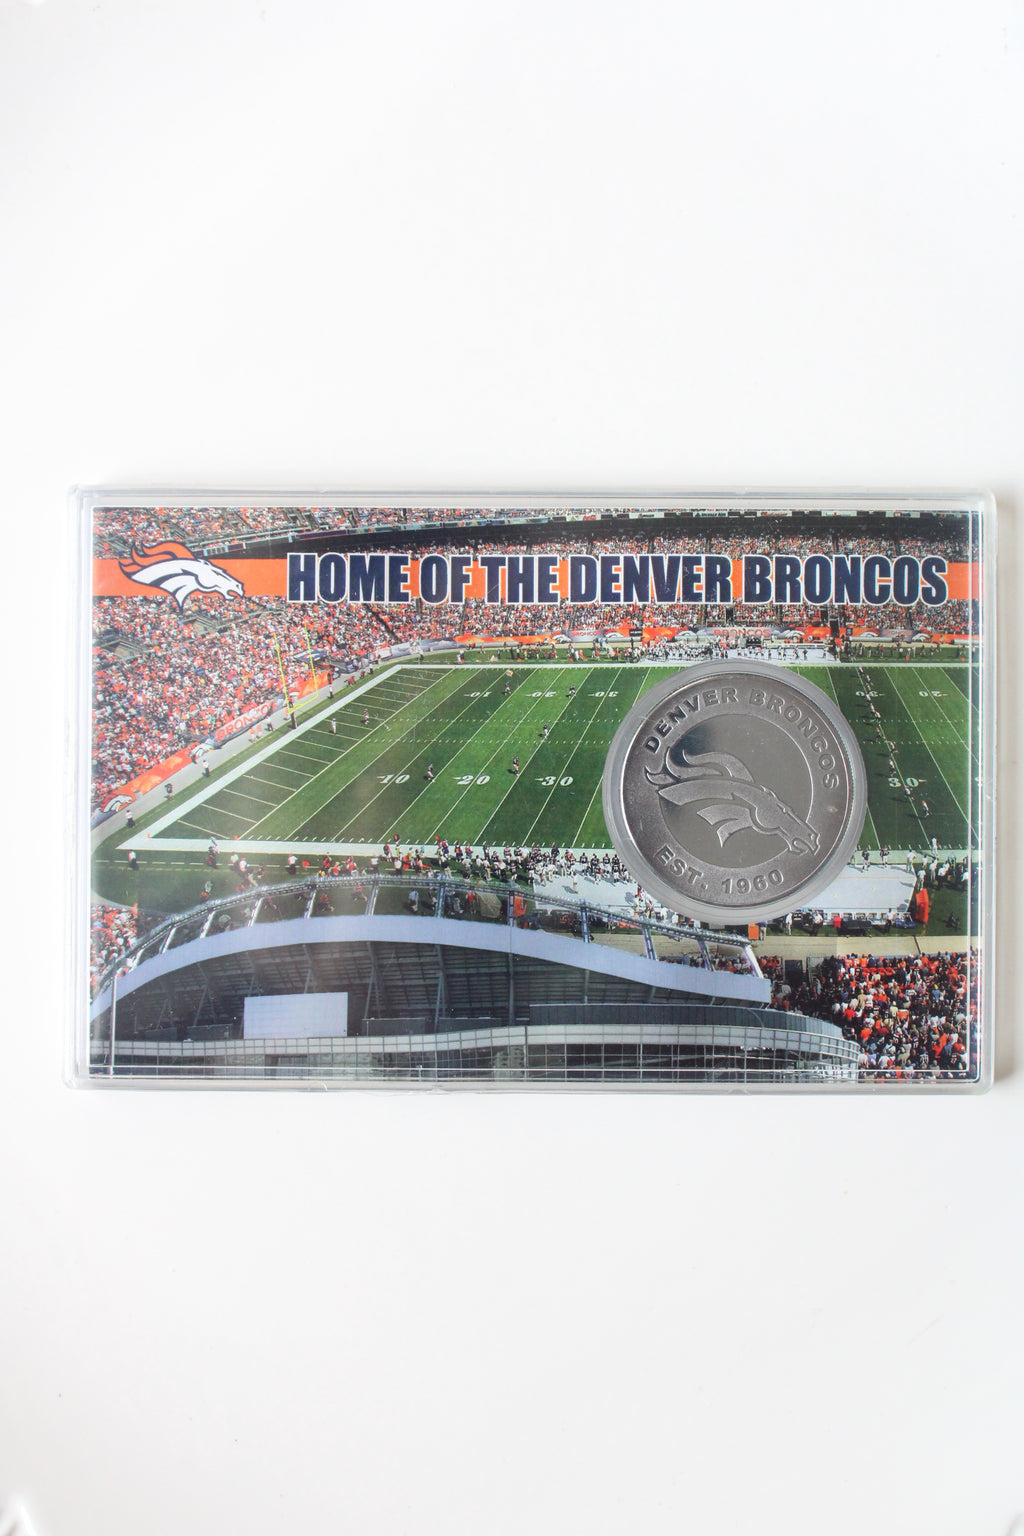 Denver Broncos 29MM Minted Medallion Silver Collector's Coin